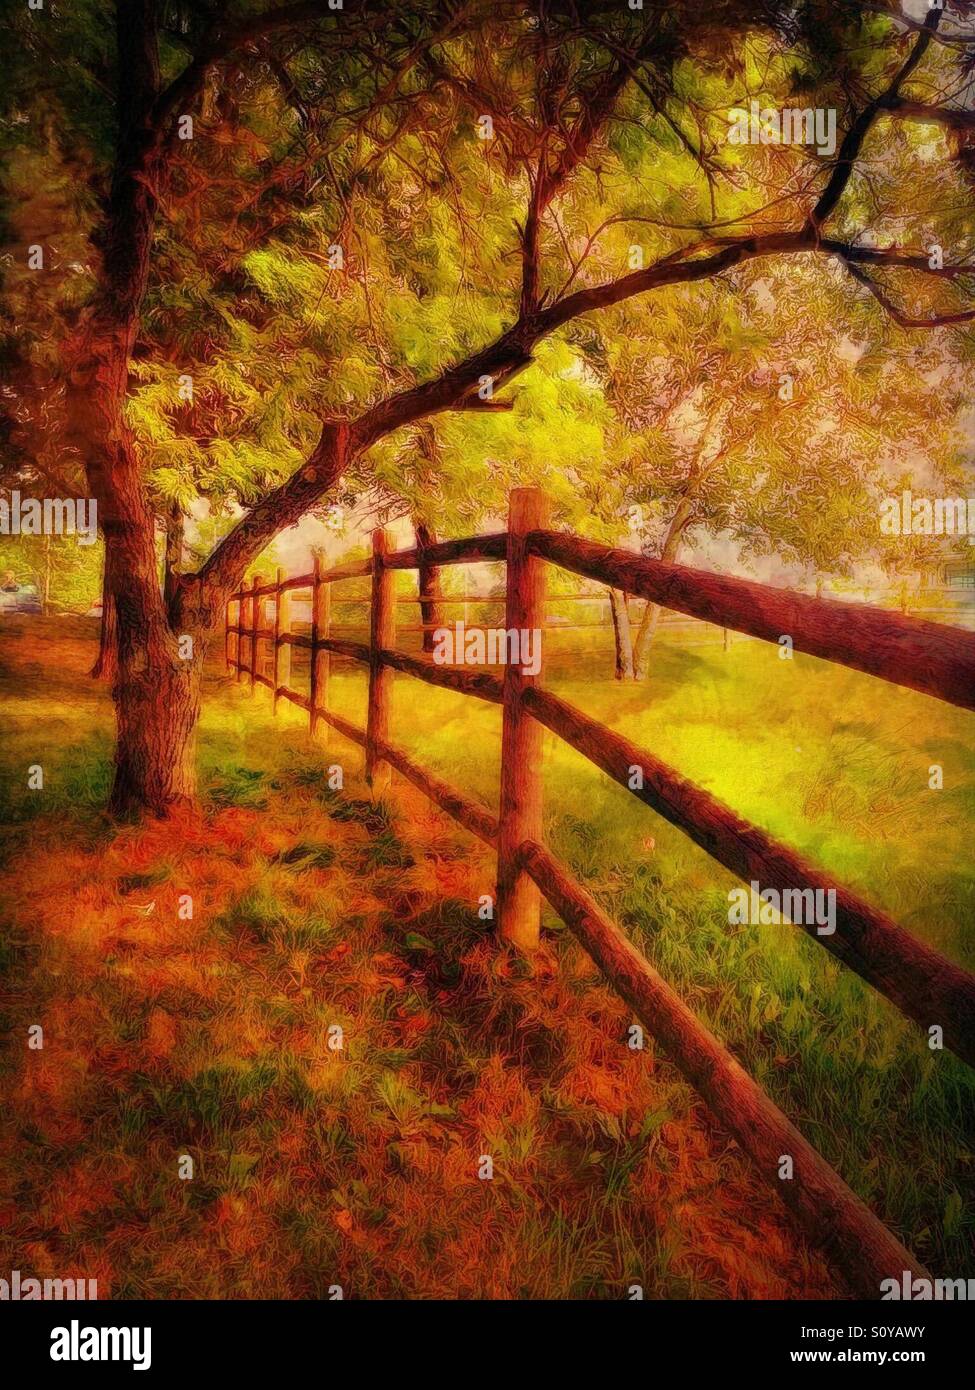 Along the Fence on an Autumn Day Stock Photo